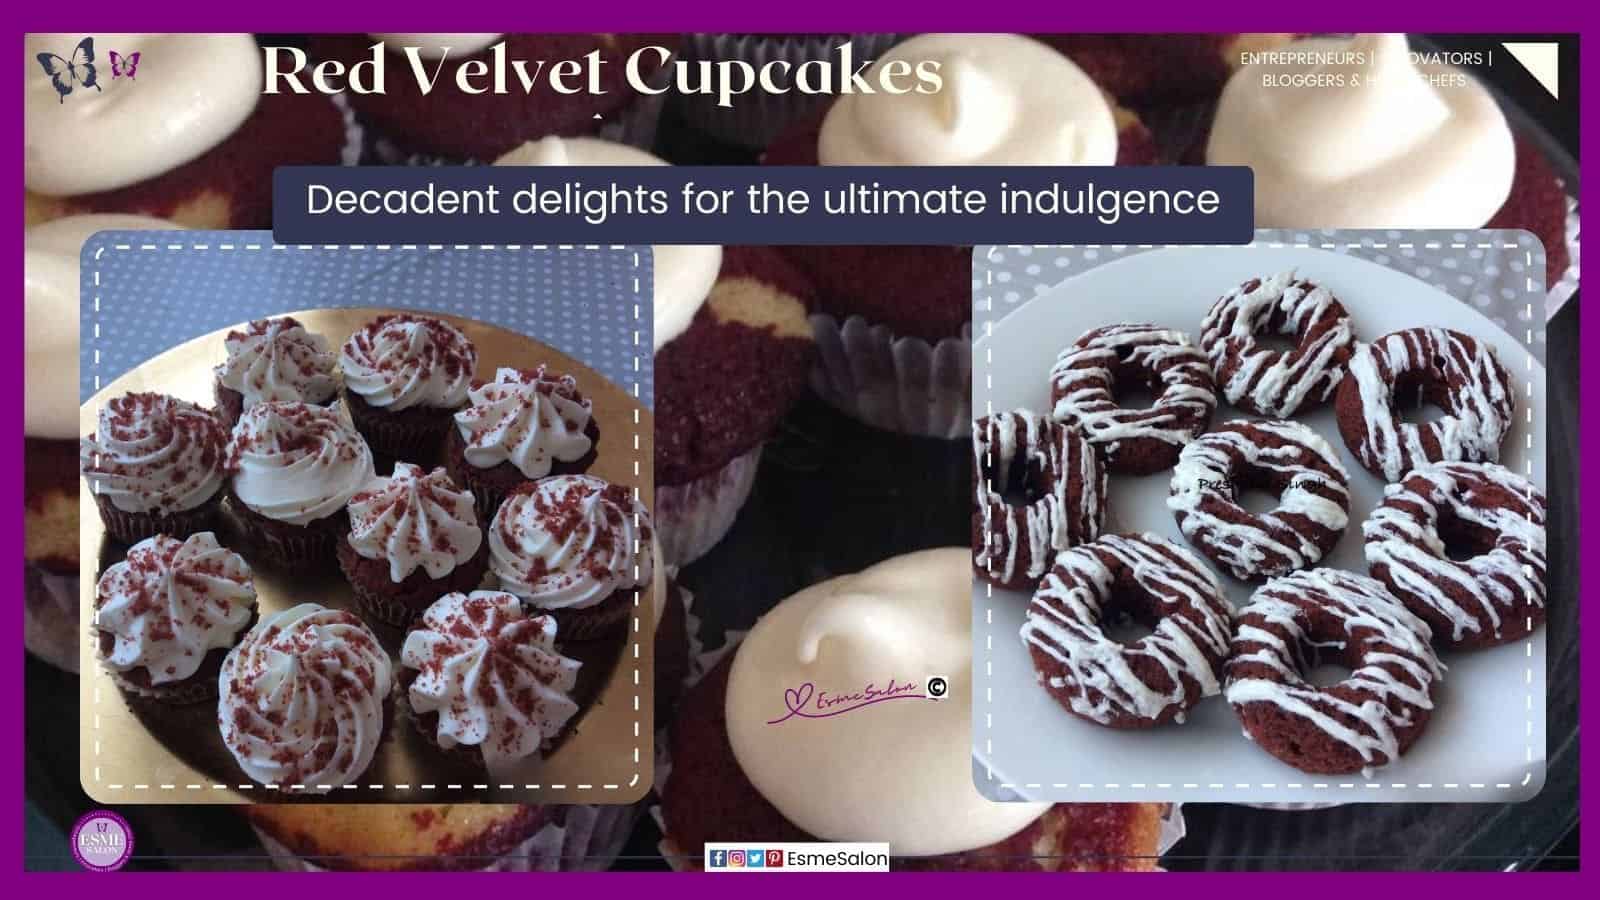 an image of Red Velvet Cupcakes with cream topping and red crumbs, as well as plain white topping and also red velvet donuts